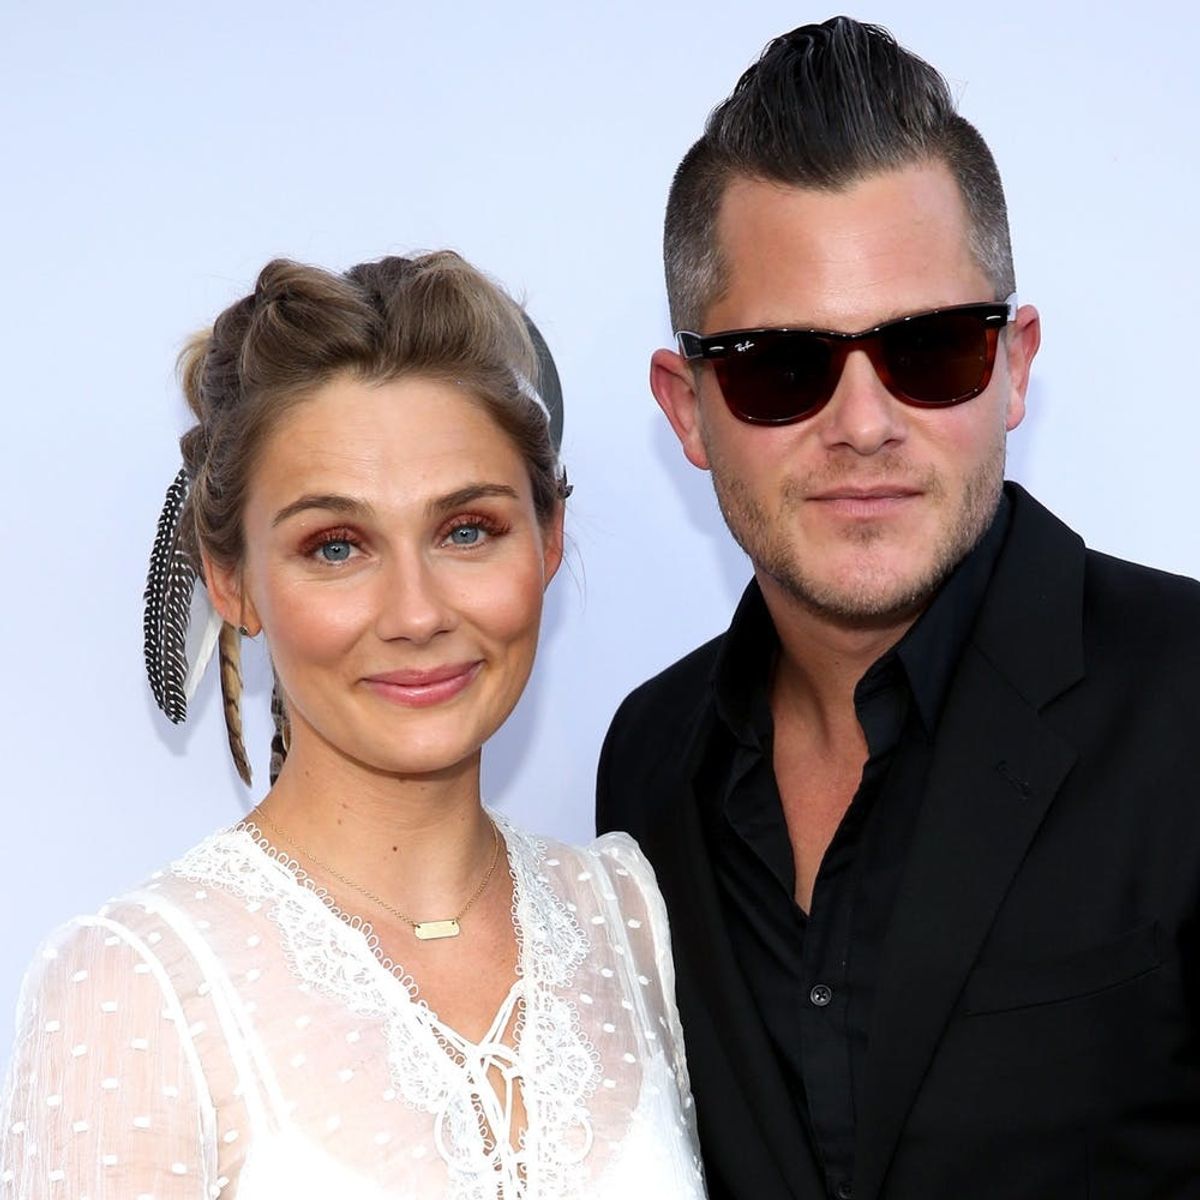 “Nashville” Star Clare Bowen Just Tied the Knot With Brandon Robert Young